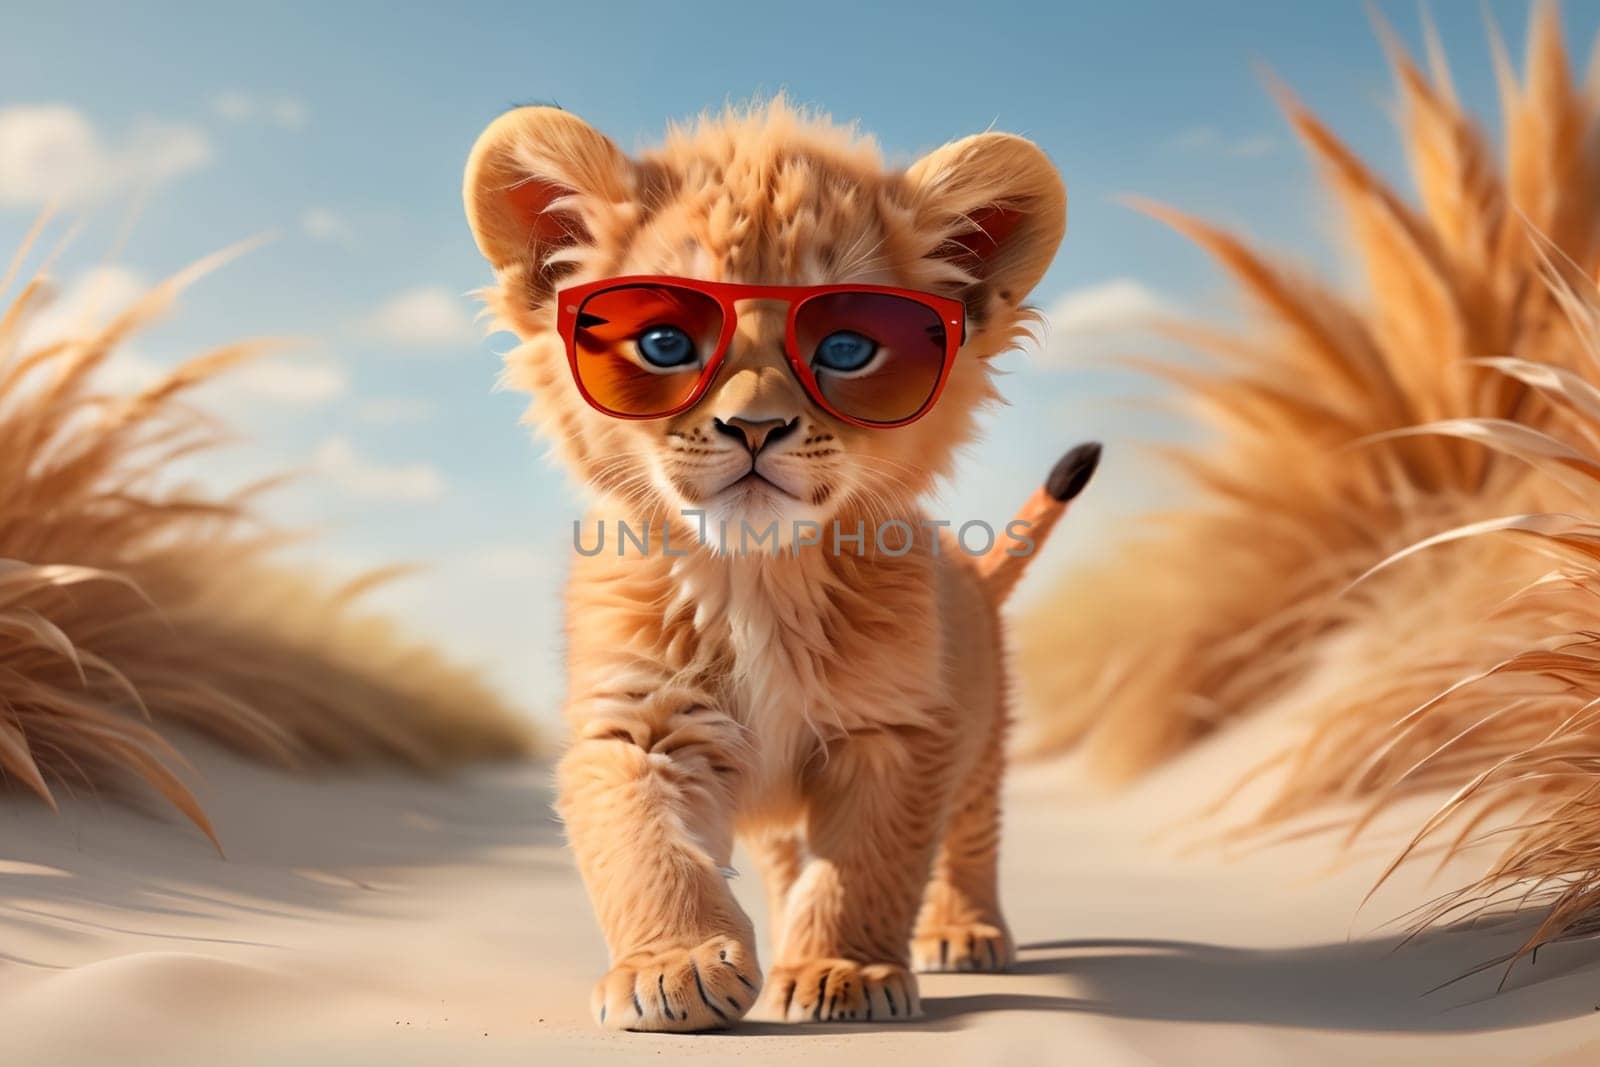 cute red tiger cub walking along the road in the desert.